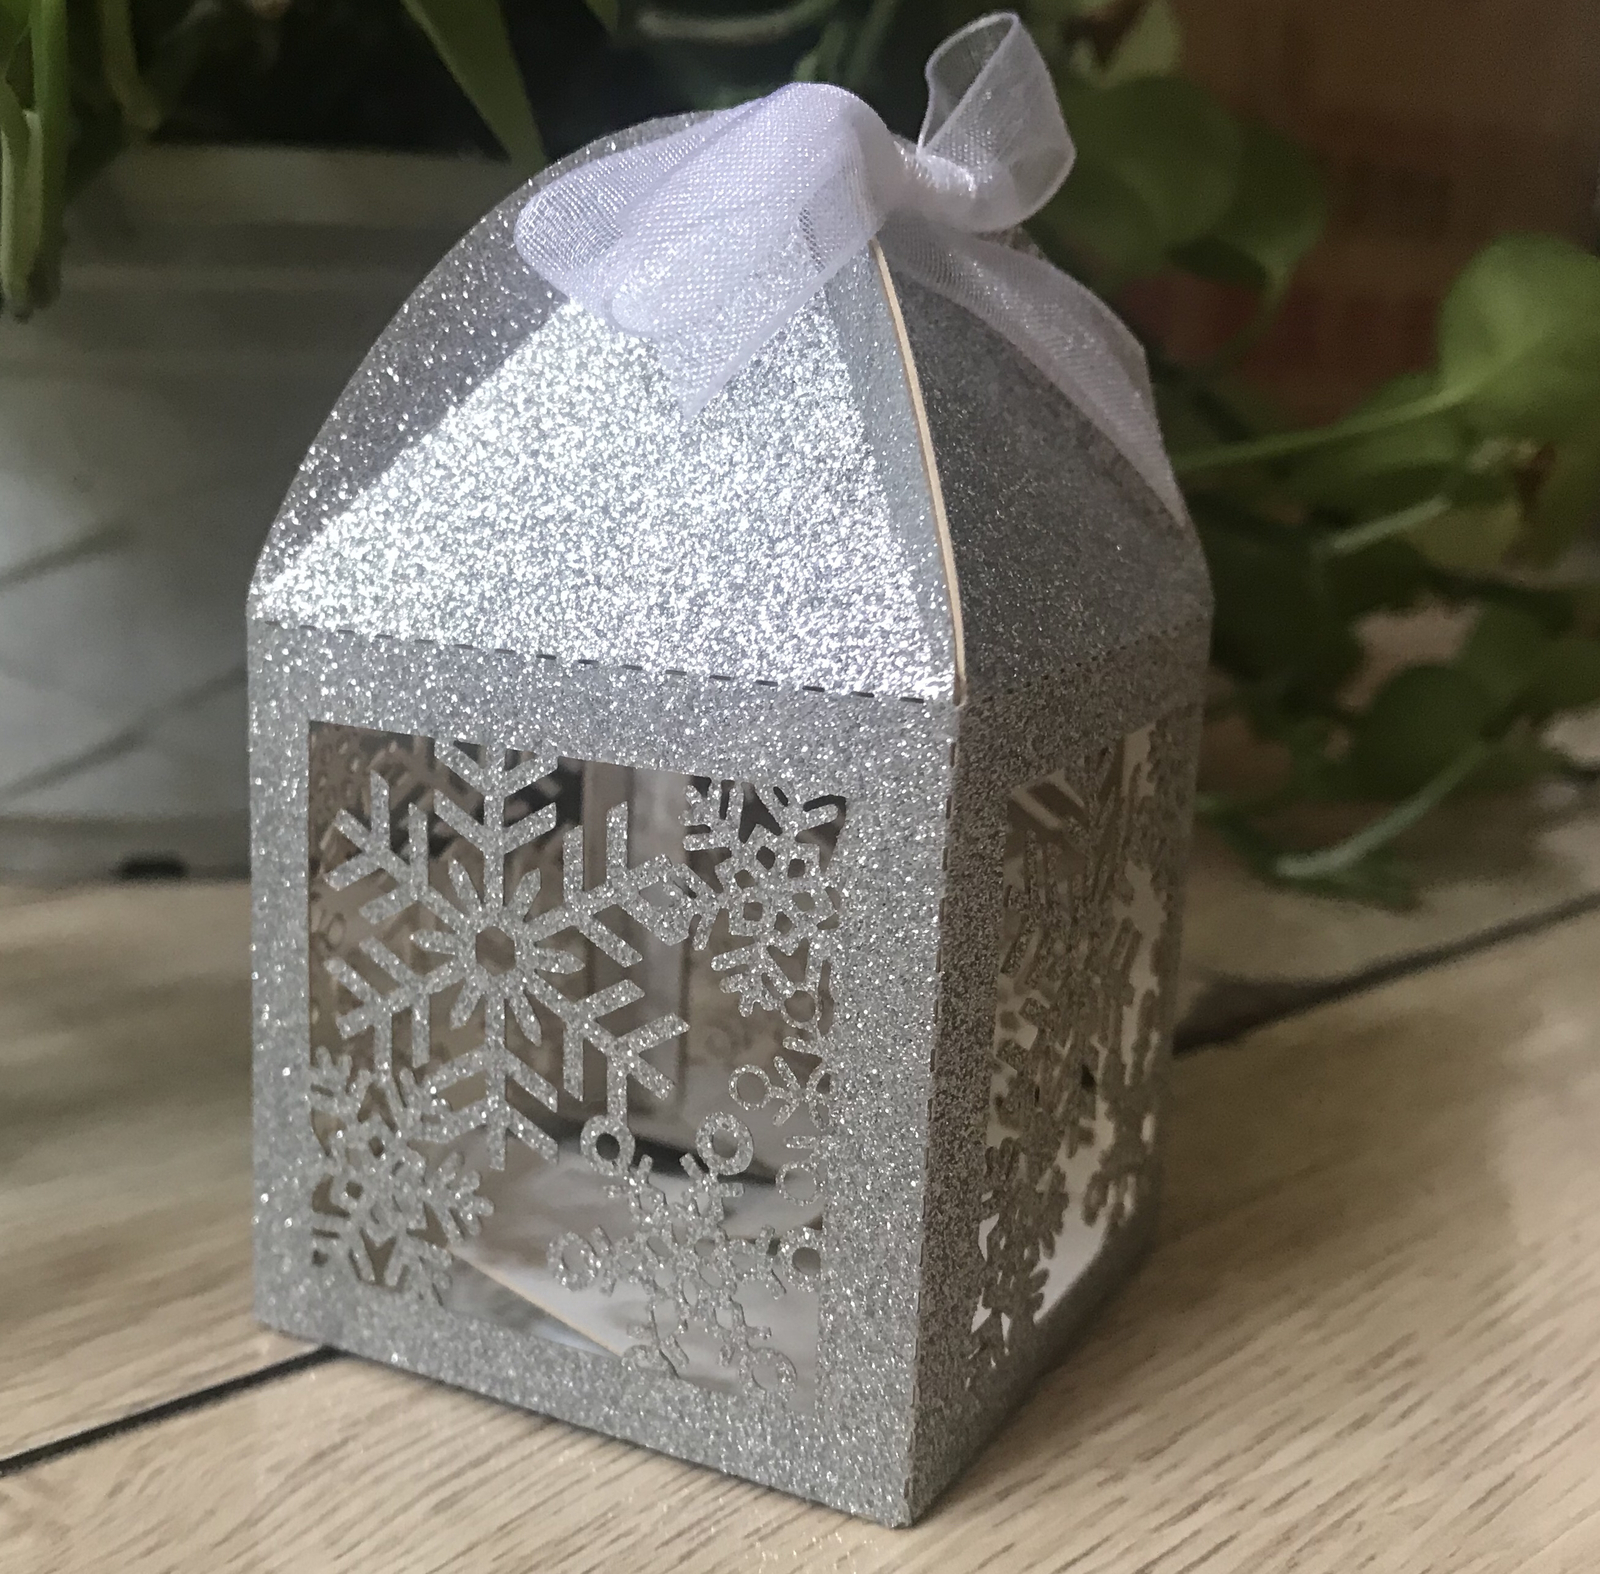 Primary image for 100pcs Snowflake Laser Cut Wedding gift Box,Candy Box Chocolate Box with Ribbon